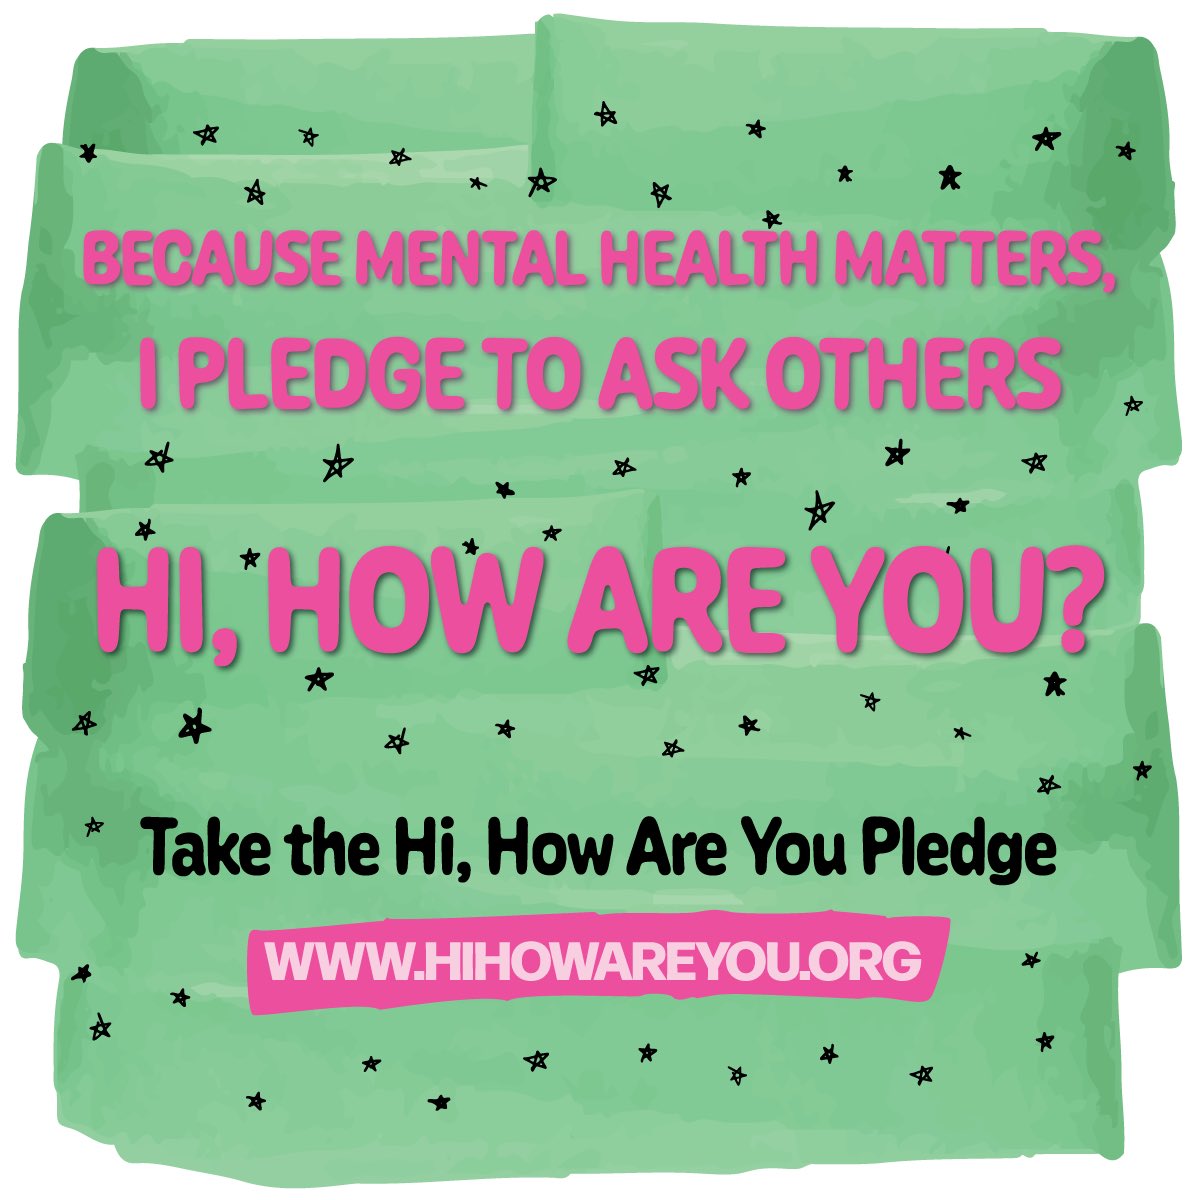 May is #MentalHealthAwarenessMonth and kicks off our #HiHowAreYou pledge! Take the pledge and tell us why mental health matters to you. Each pledge automatically enters you to win a merch bundle including items from @supremenewyork & @vans. bit.ly/3UE54wt